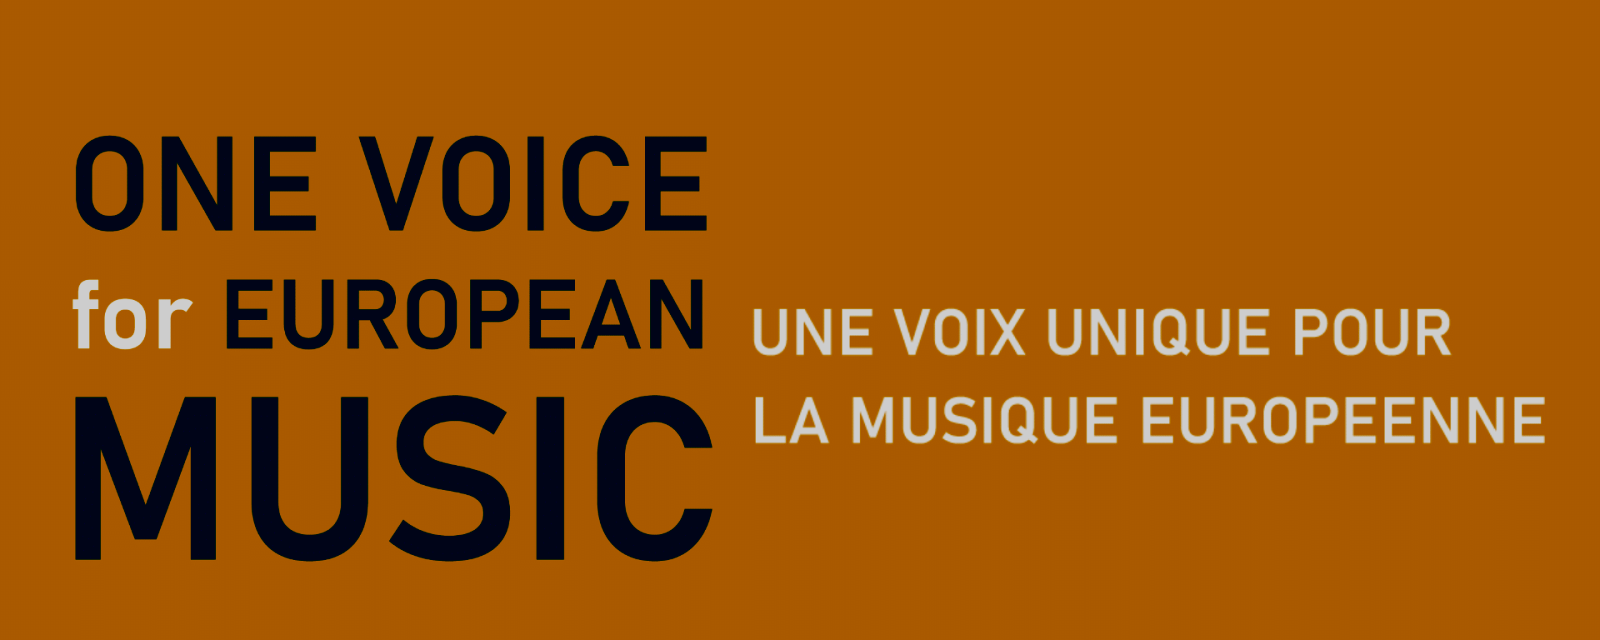 one-voice-for-european-music